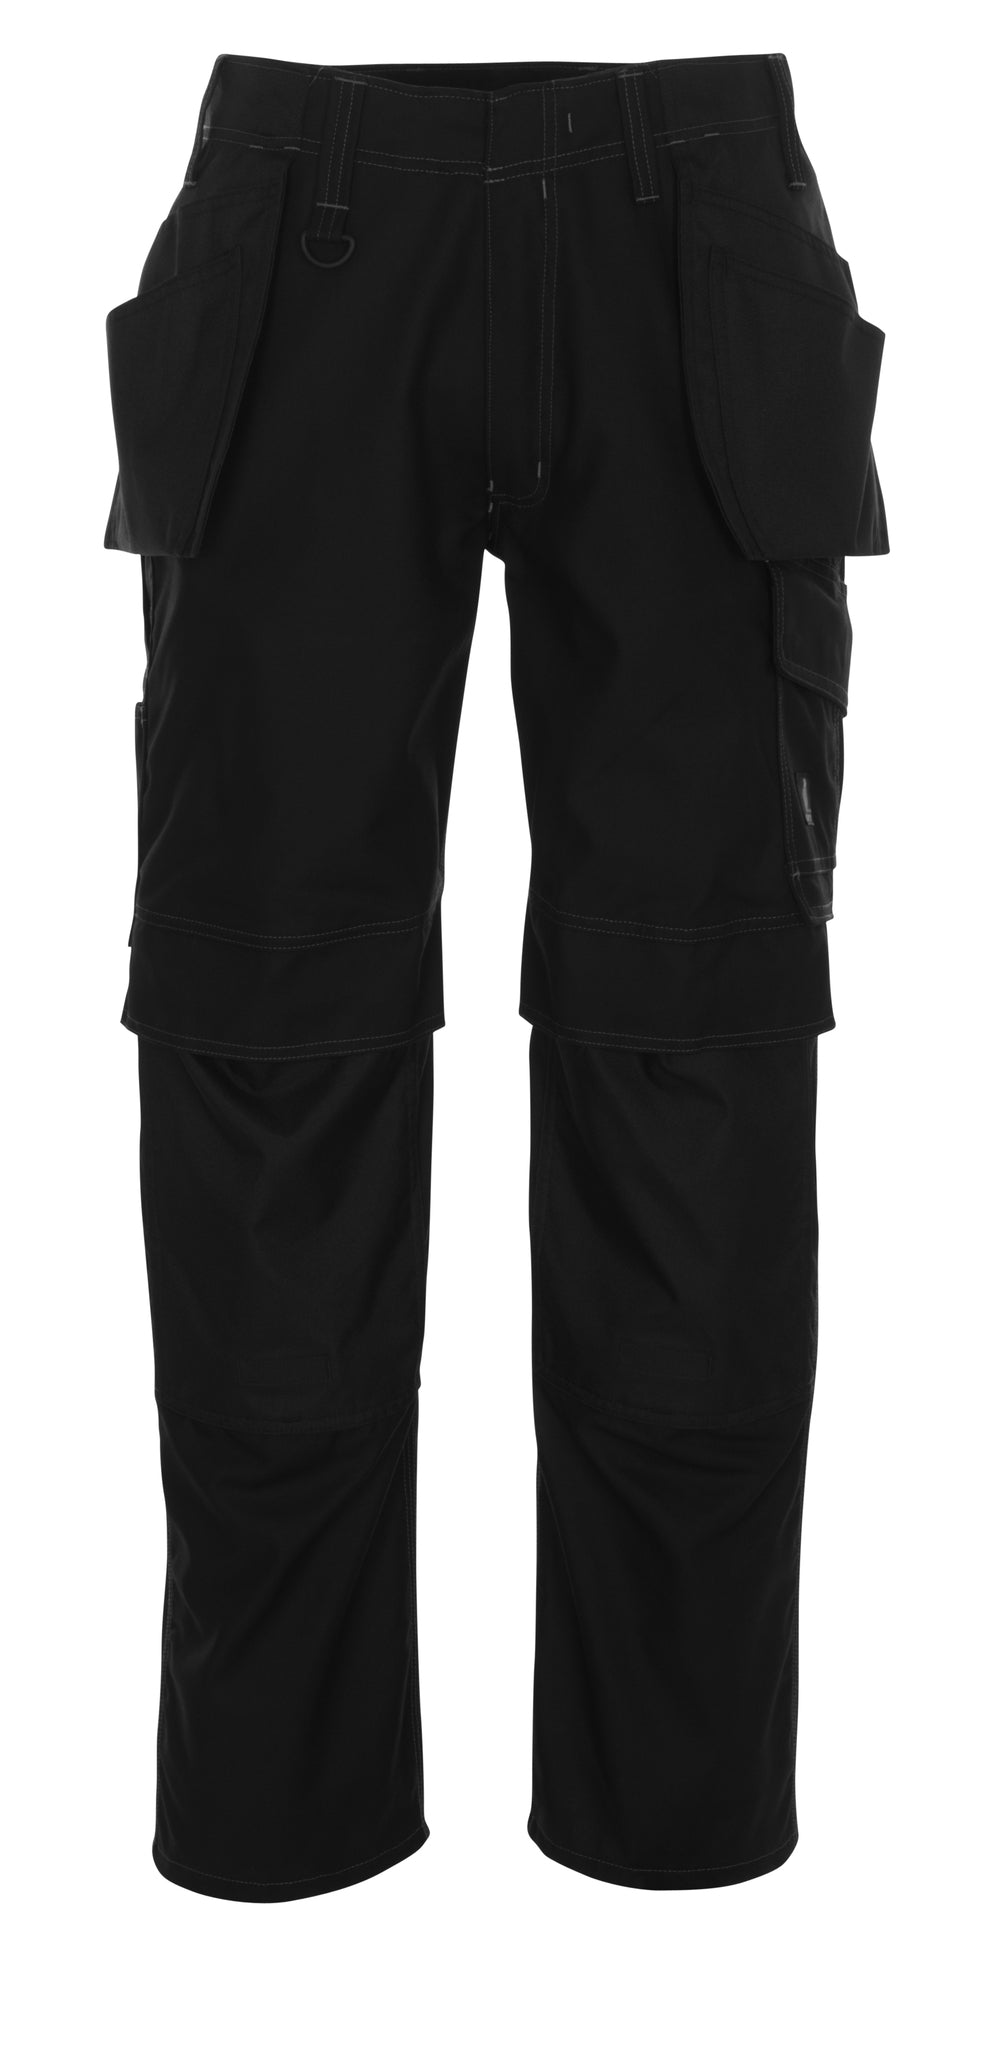 MASCOT®INDUSTRY Trousers with holster pockets Springfield 10131 - DaltonSafety